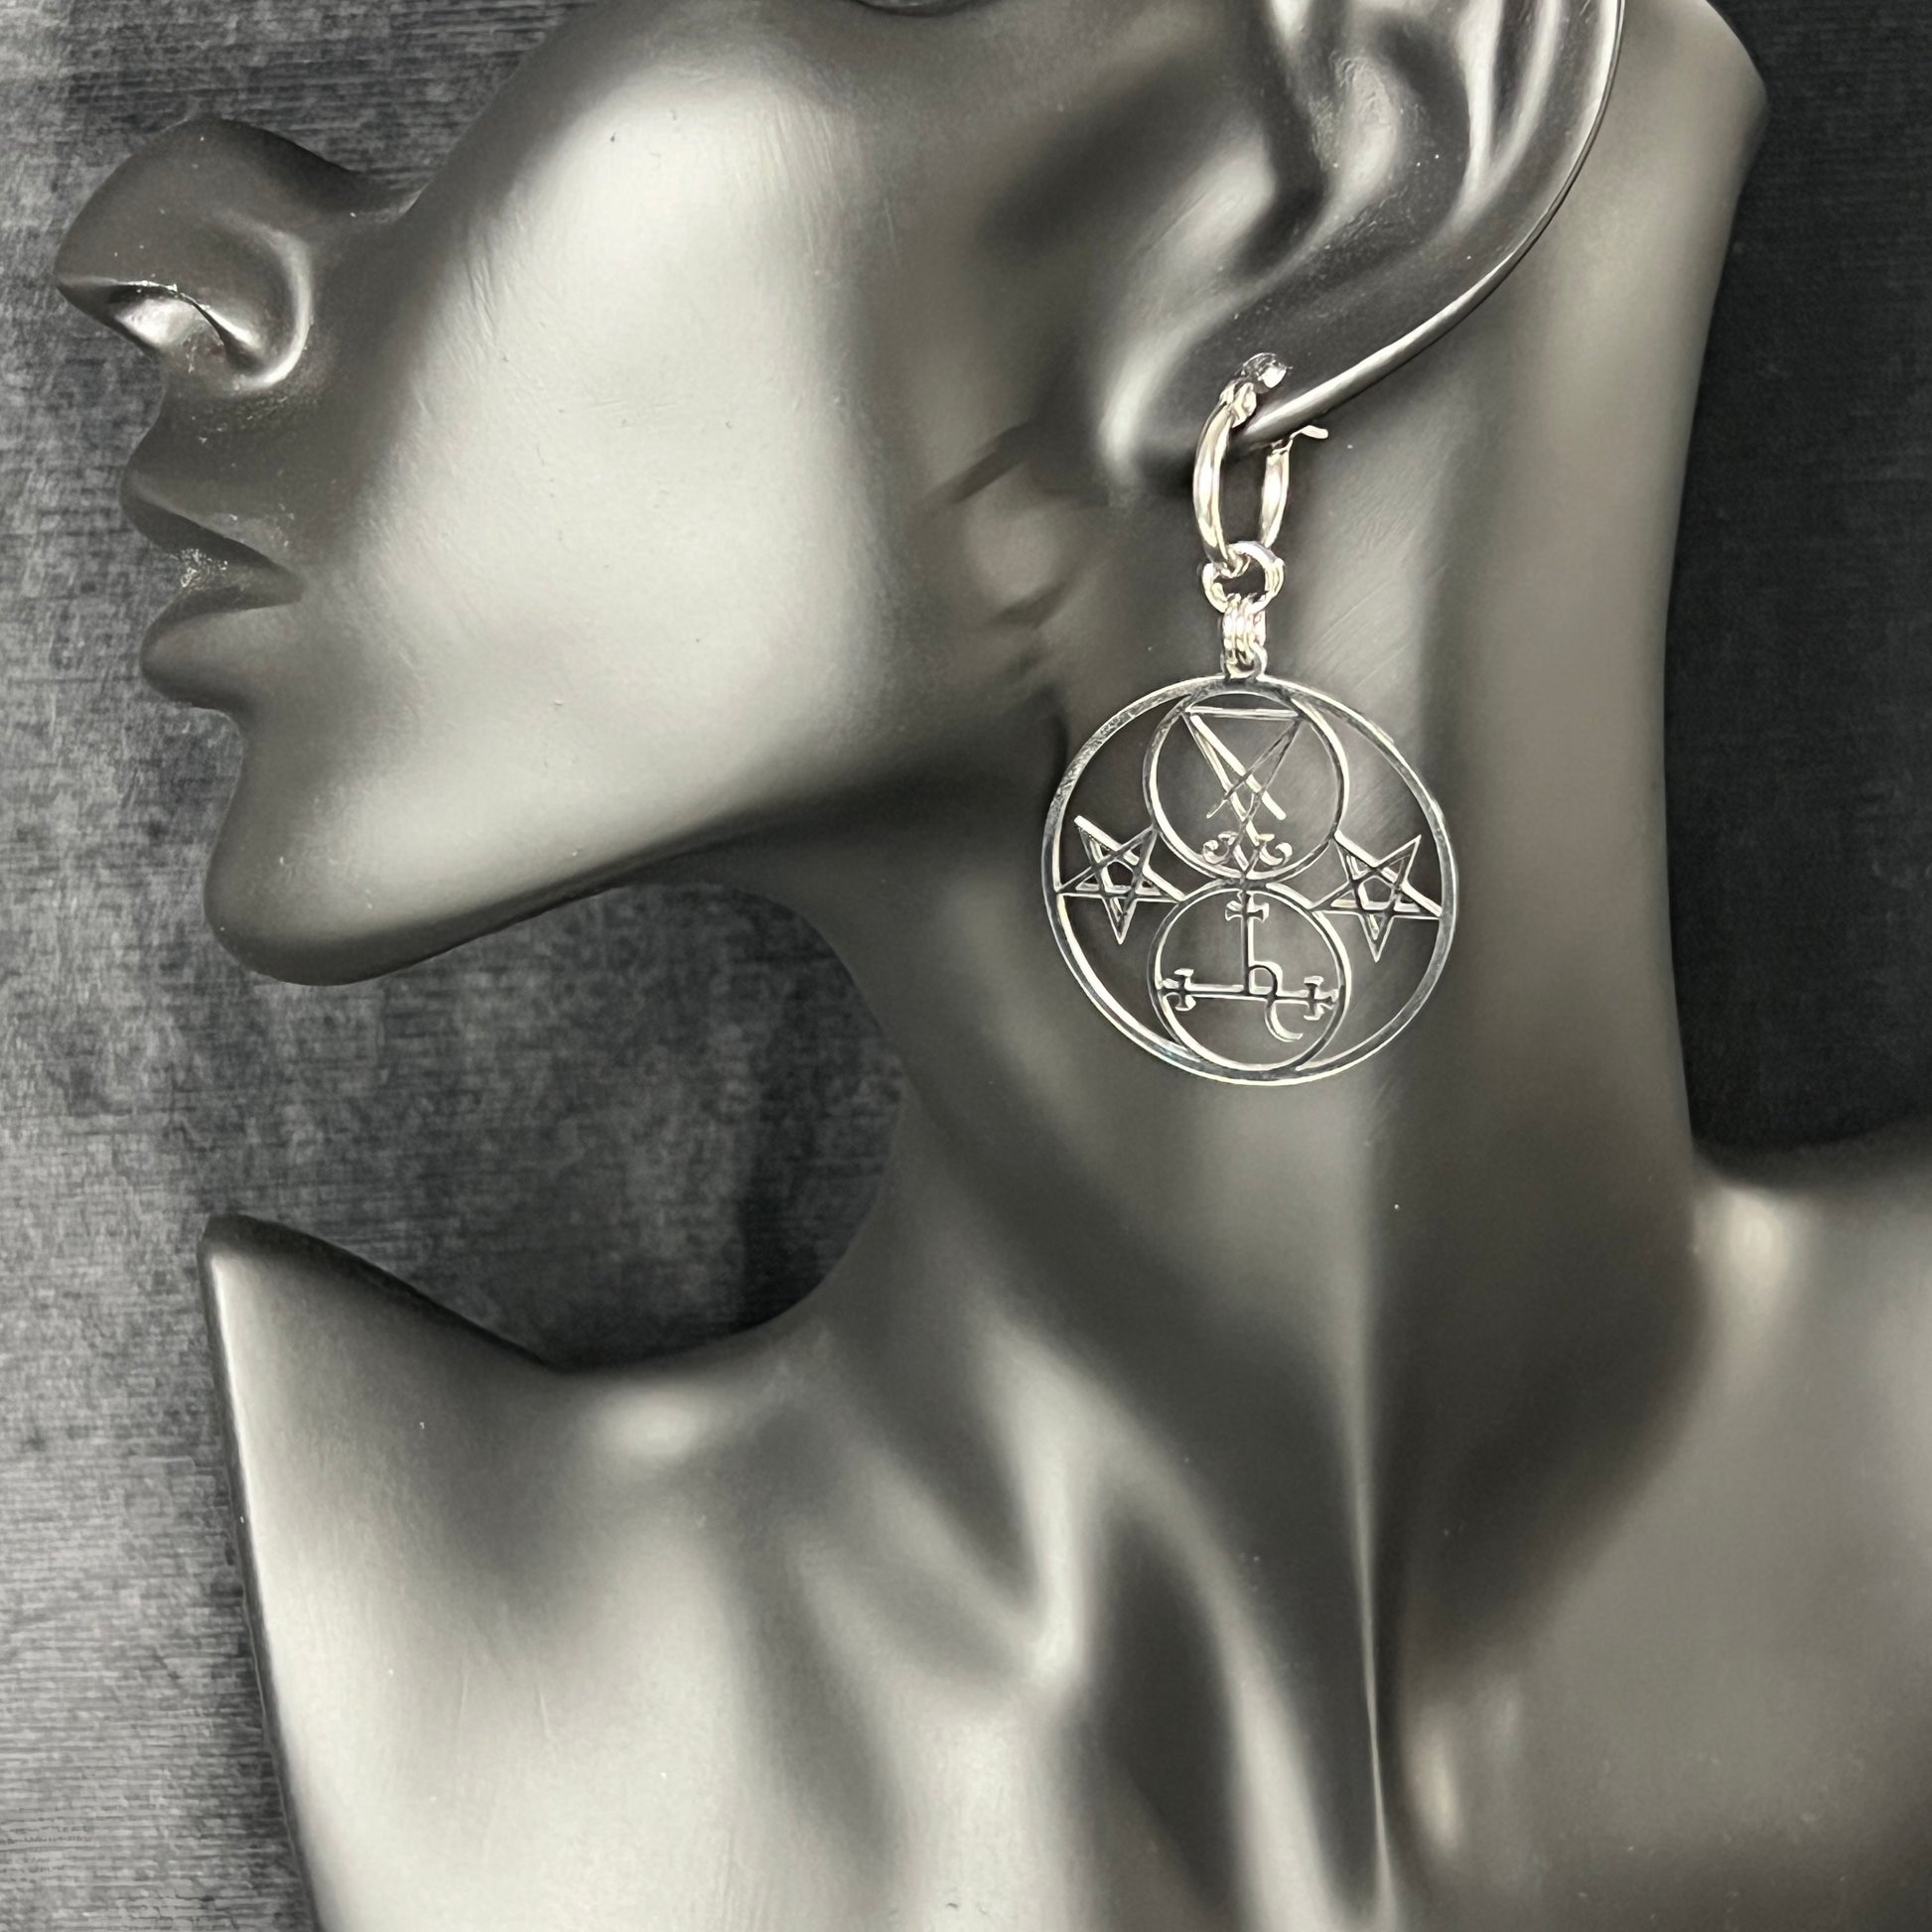 Luciferian earrings, Lilith and Lucifer sigils, inverted pentacle, made of stainless steel Baguette Magick